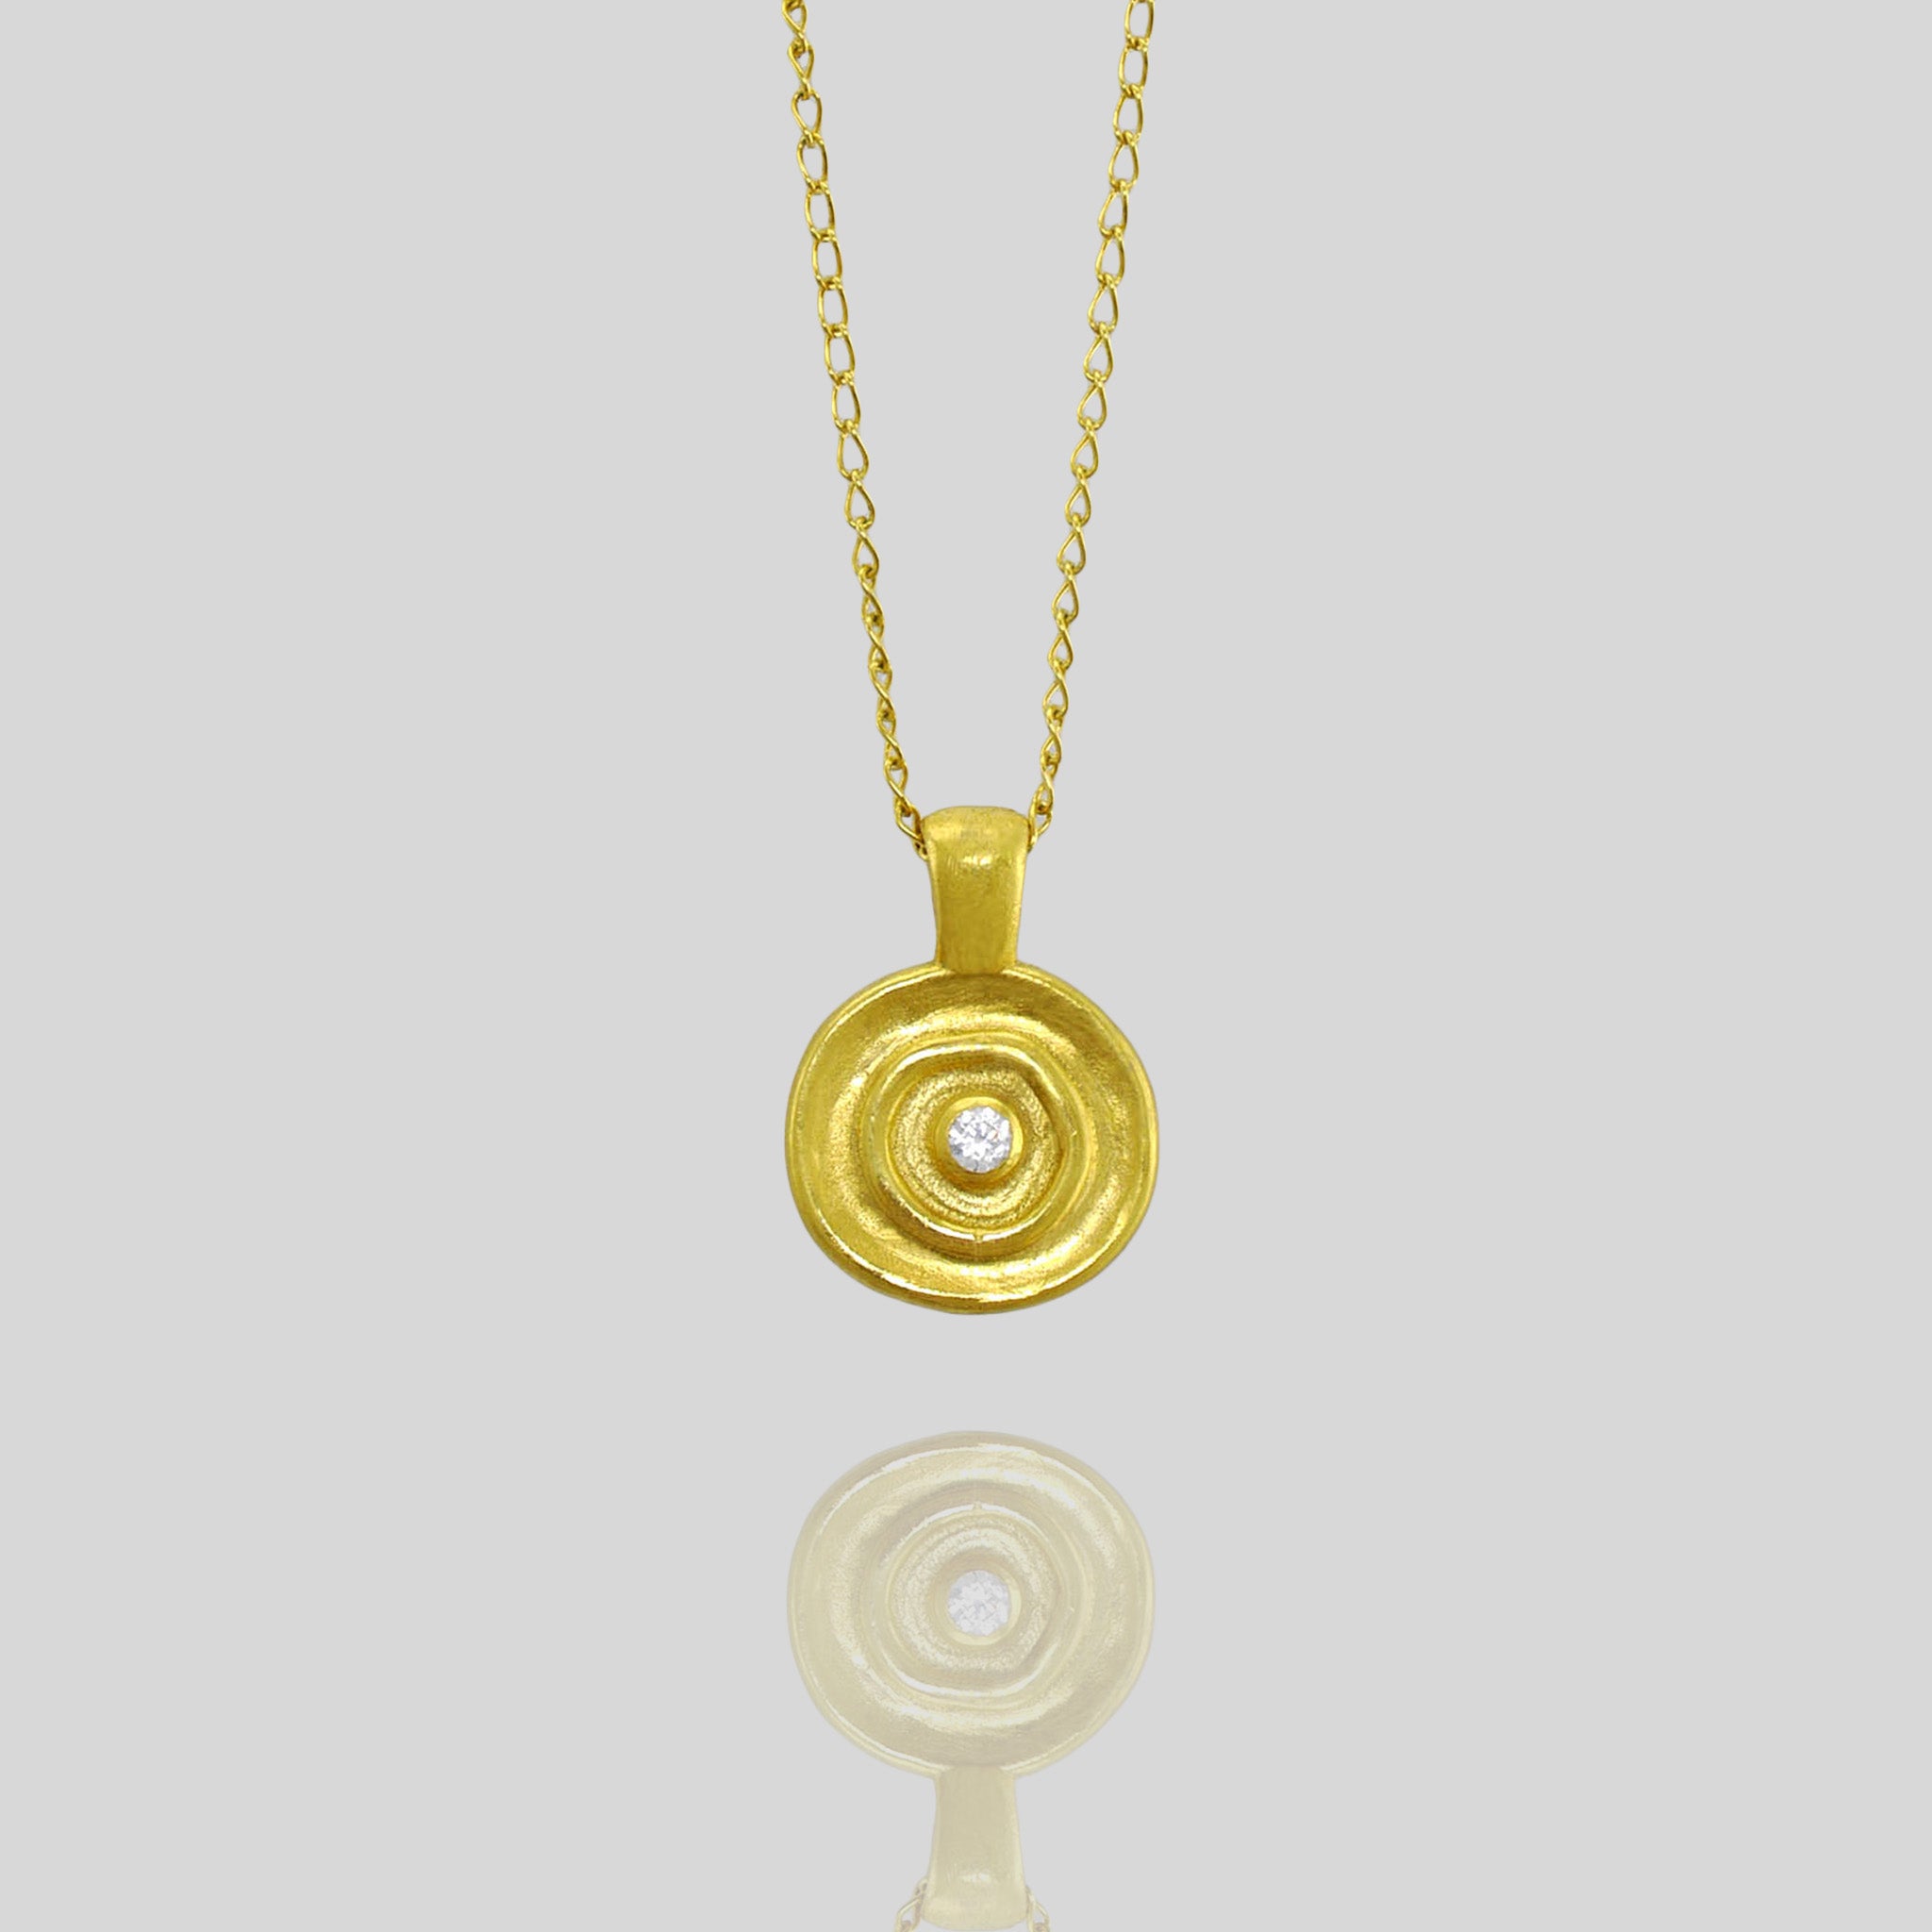 Close up of Handcrafted Yellow Gold round pendant, featuring a central diamond inspired by ancient Egyptian Pharaohs' jewelry.